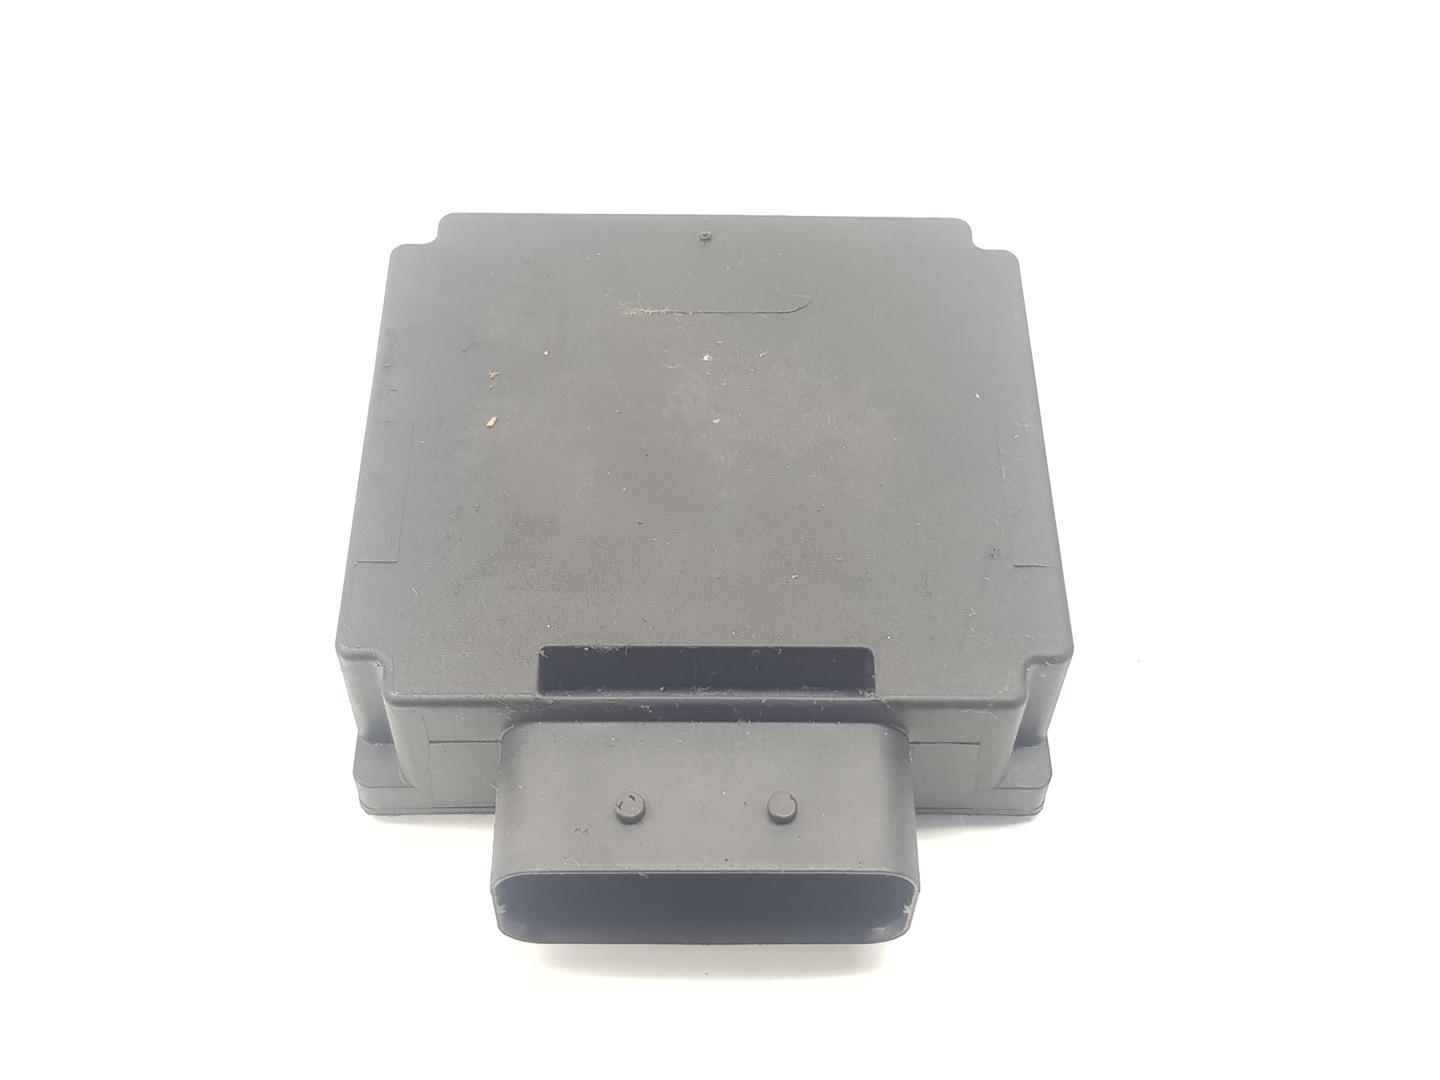 VOLKSWAGEN Touran 1 generation (2003-2015) Other Control Units 3AA919041A, 3AA919041A 24224356